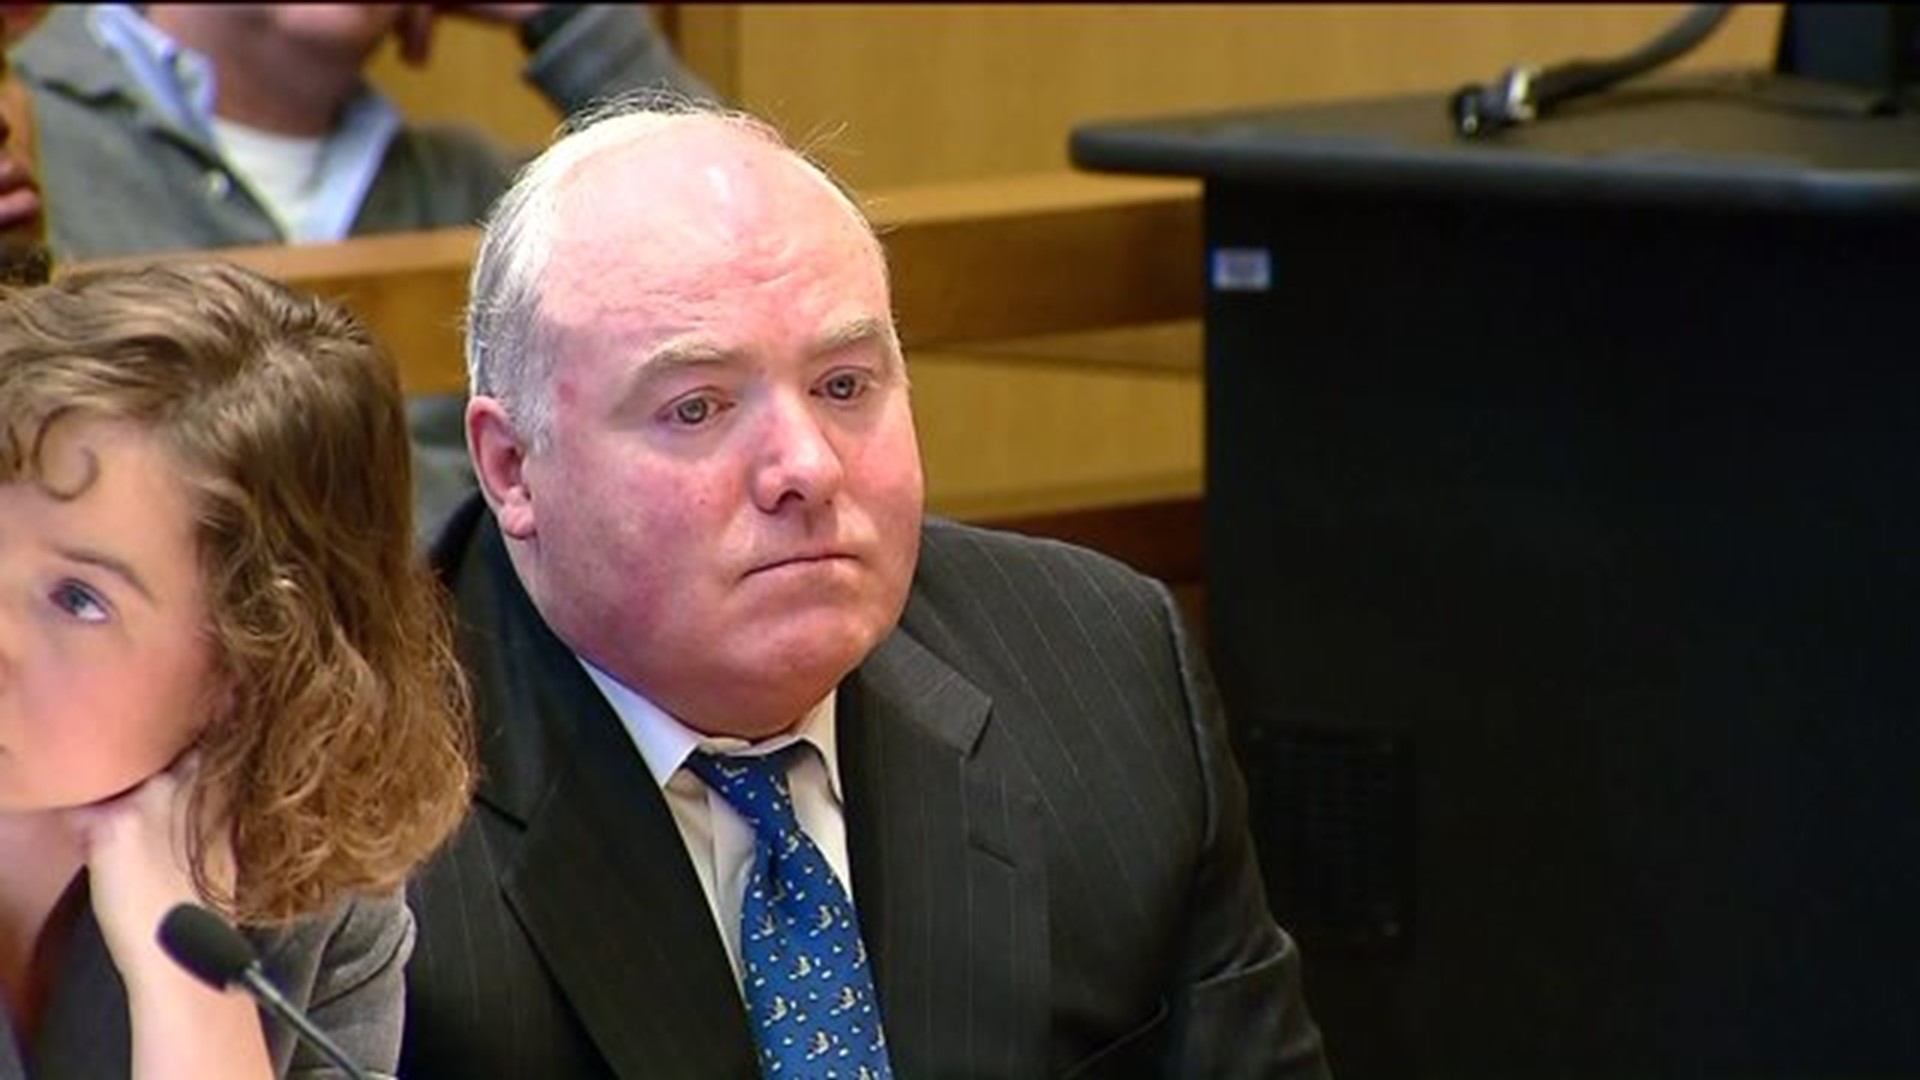 Skakel case will appear before State Supreme Court this week